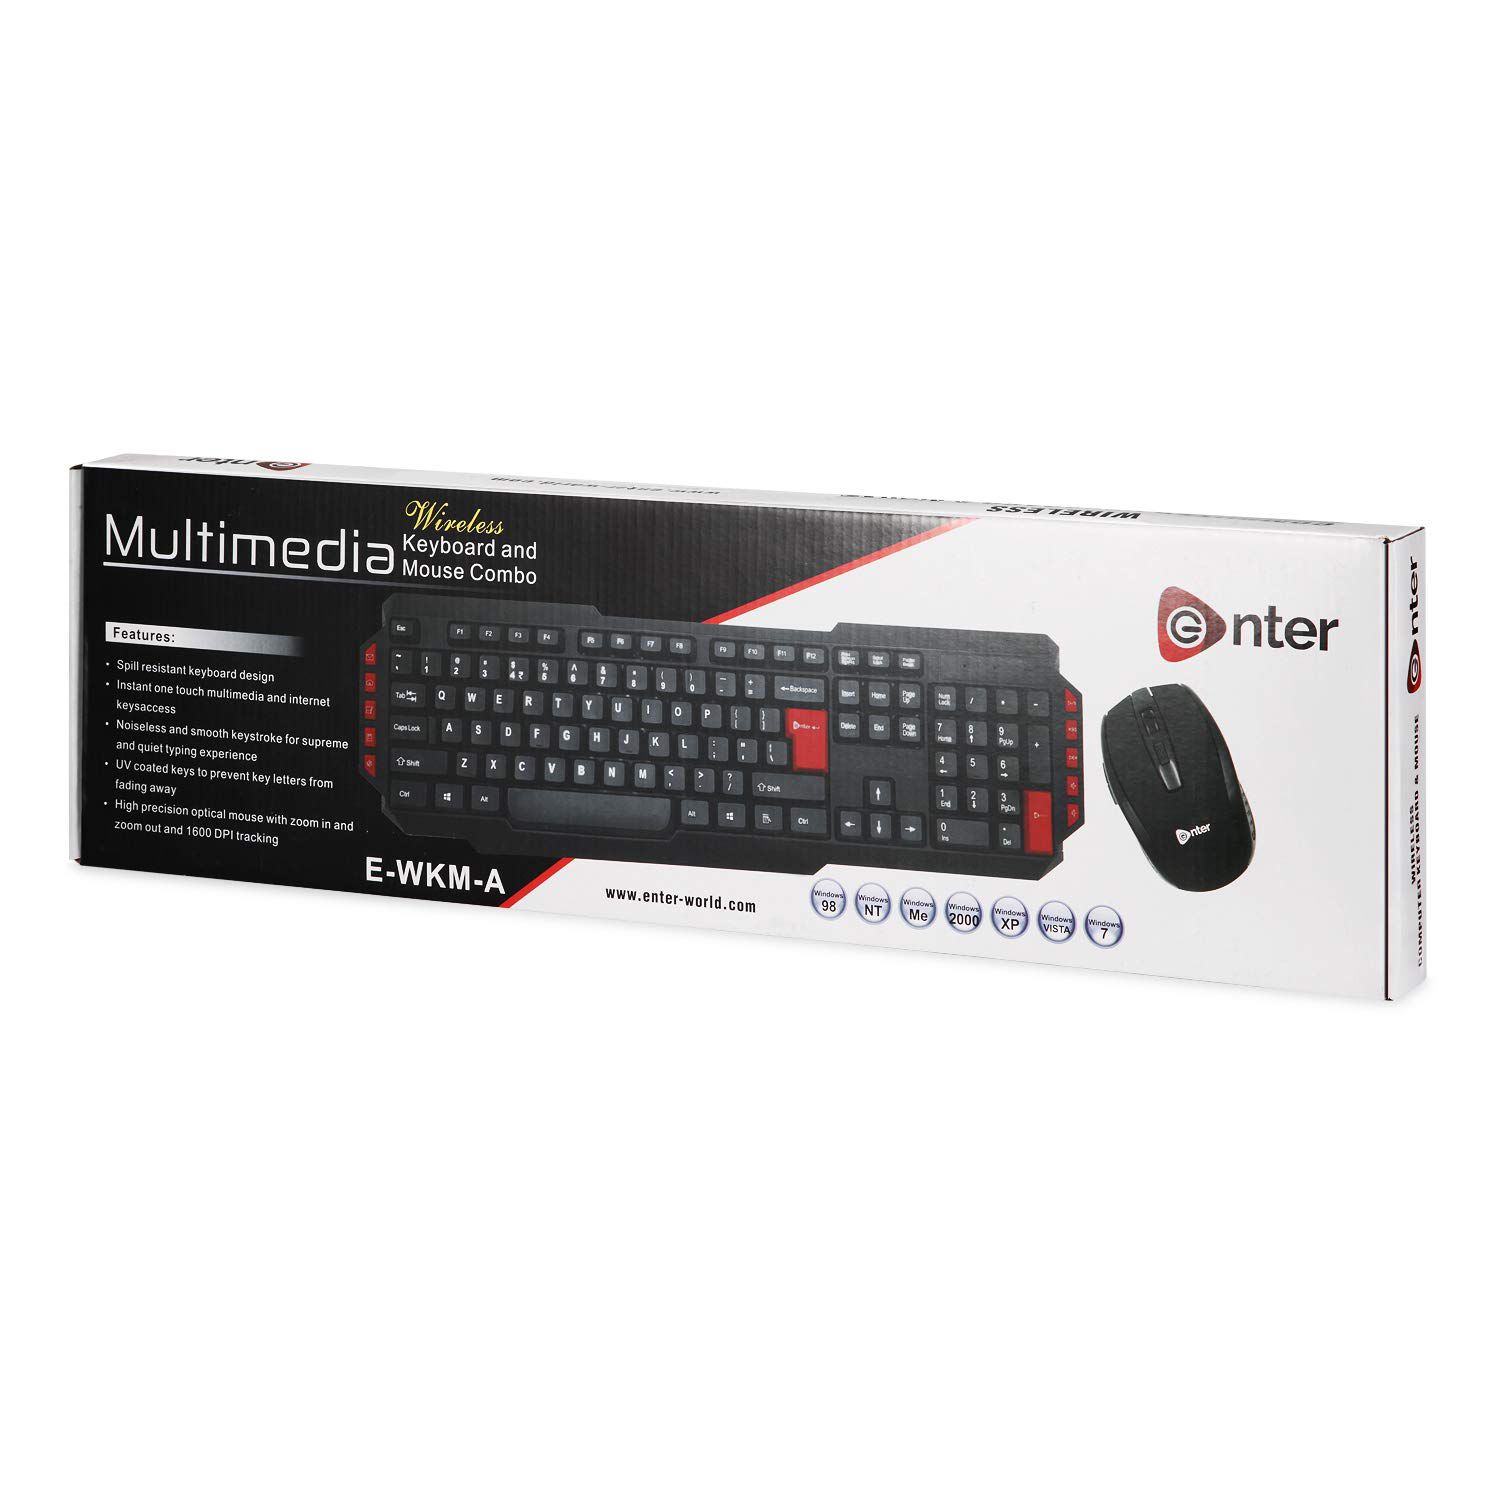 dongle for hp 5189 wireless keyboard